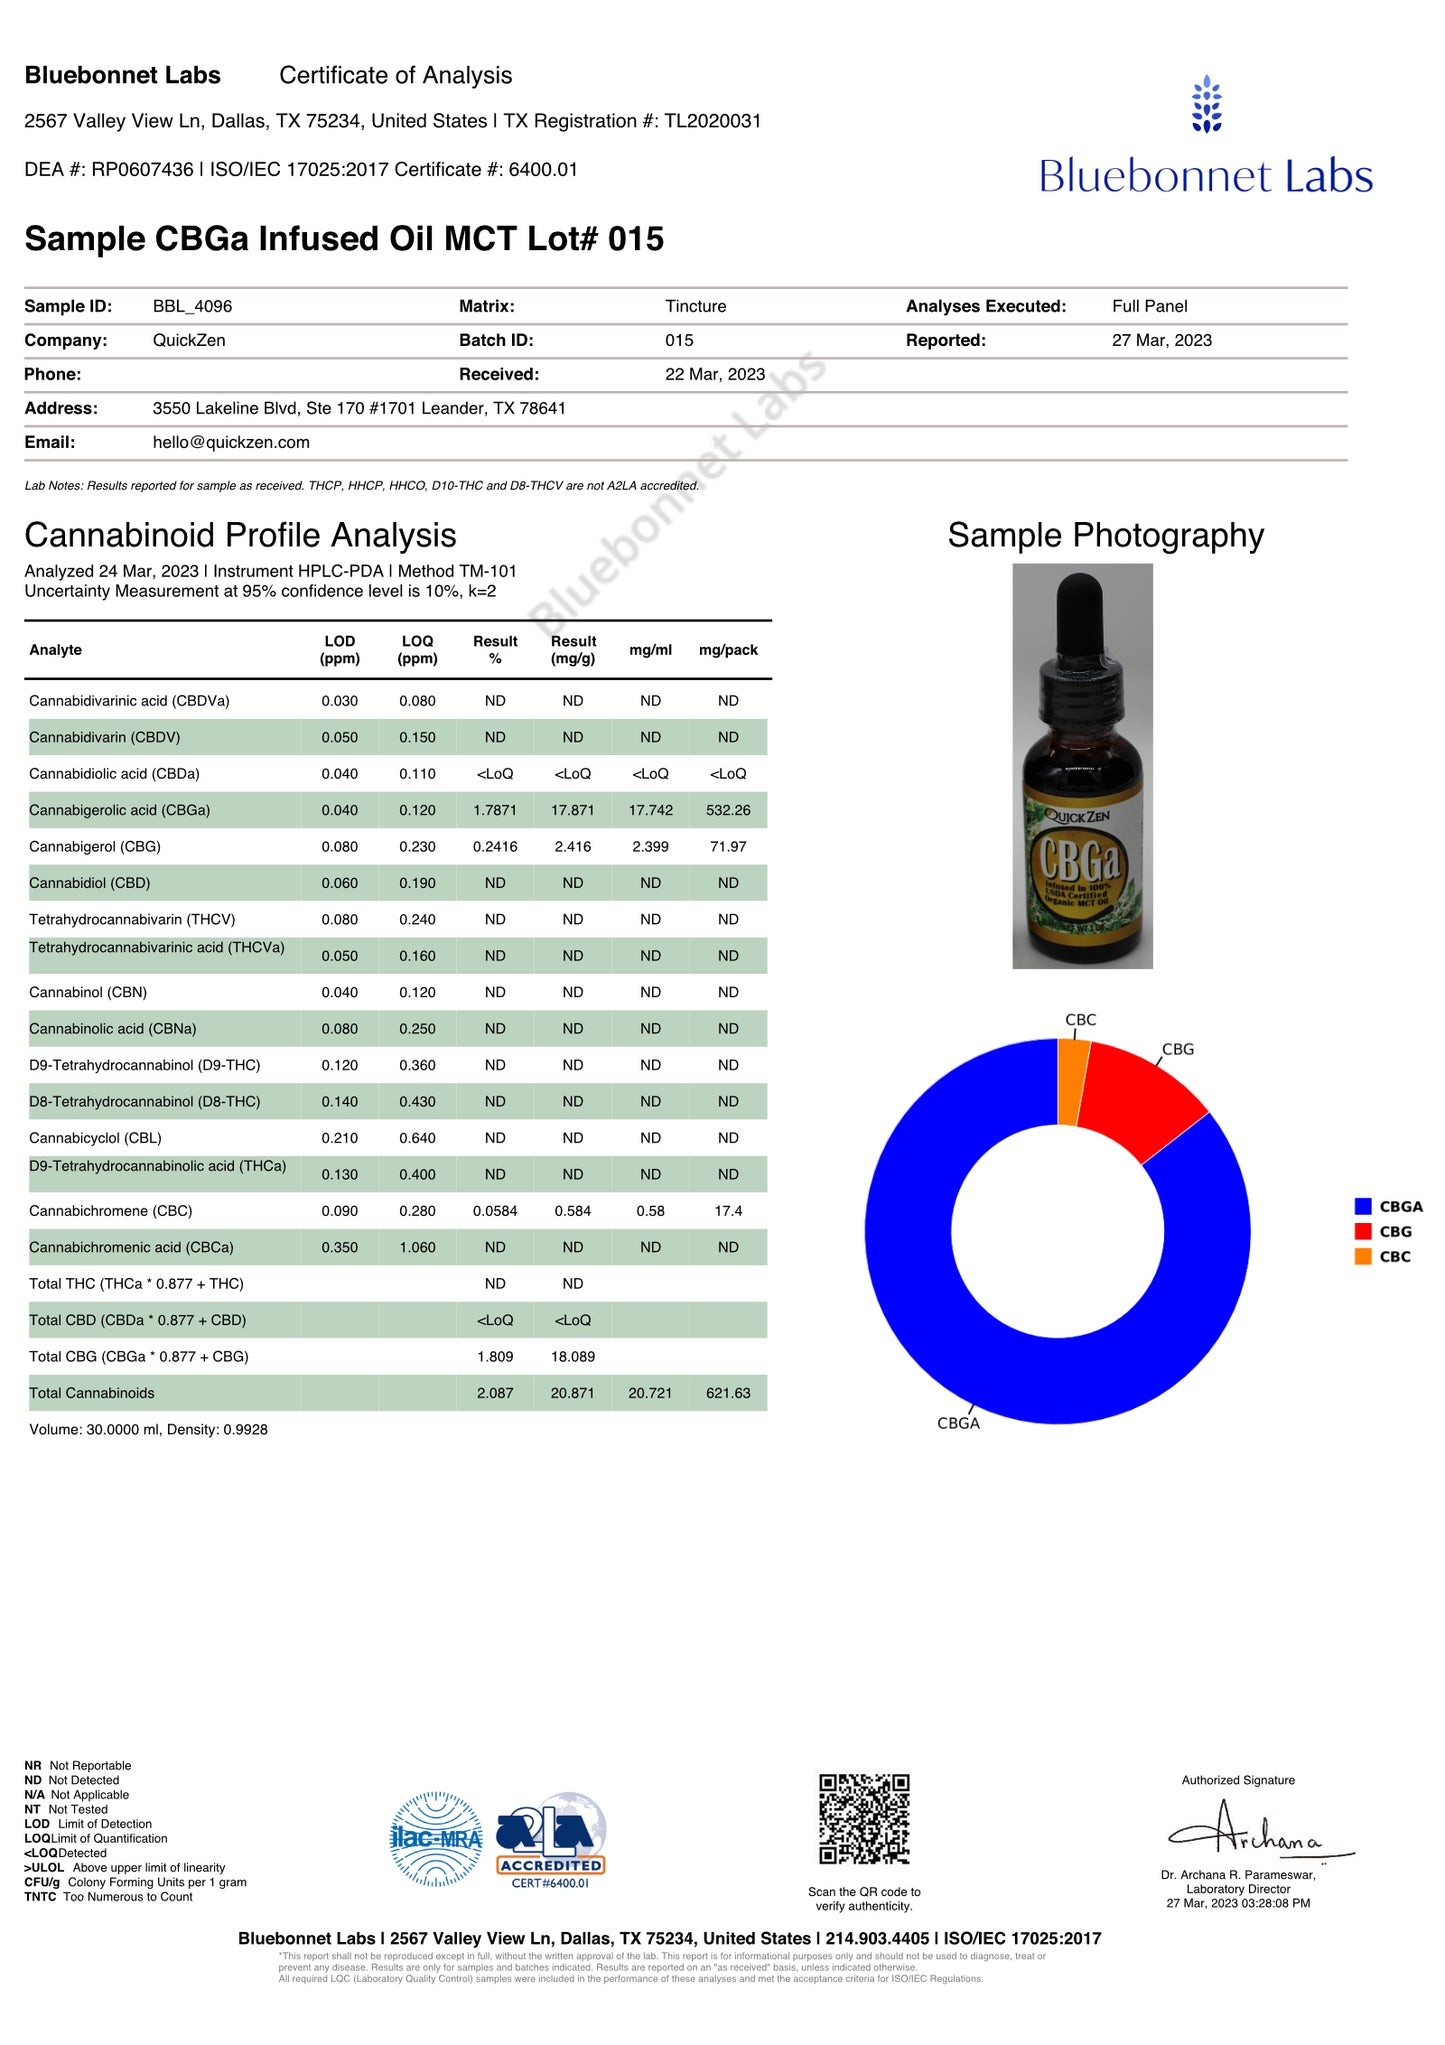 Lot 015 page one, cannabinoids profile analysis. Blue Bonnet Laboratories Certified Full Panel Tests.